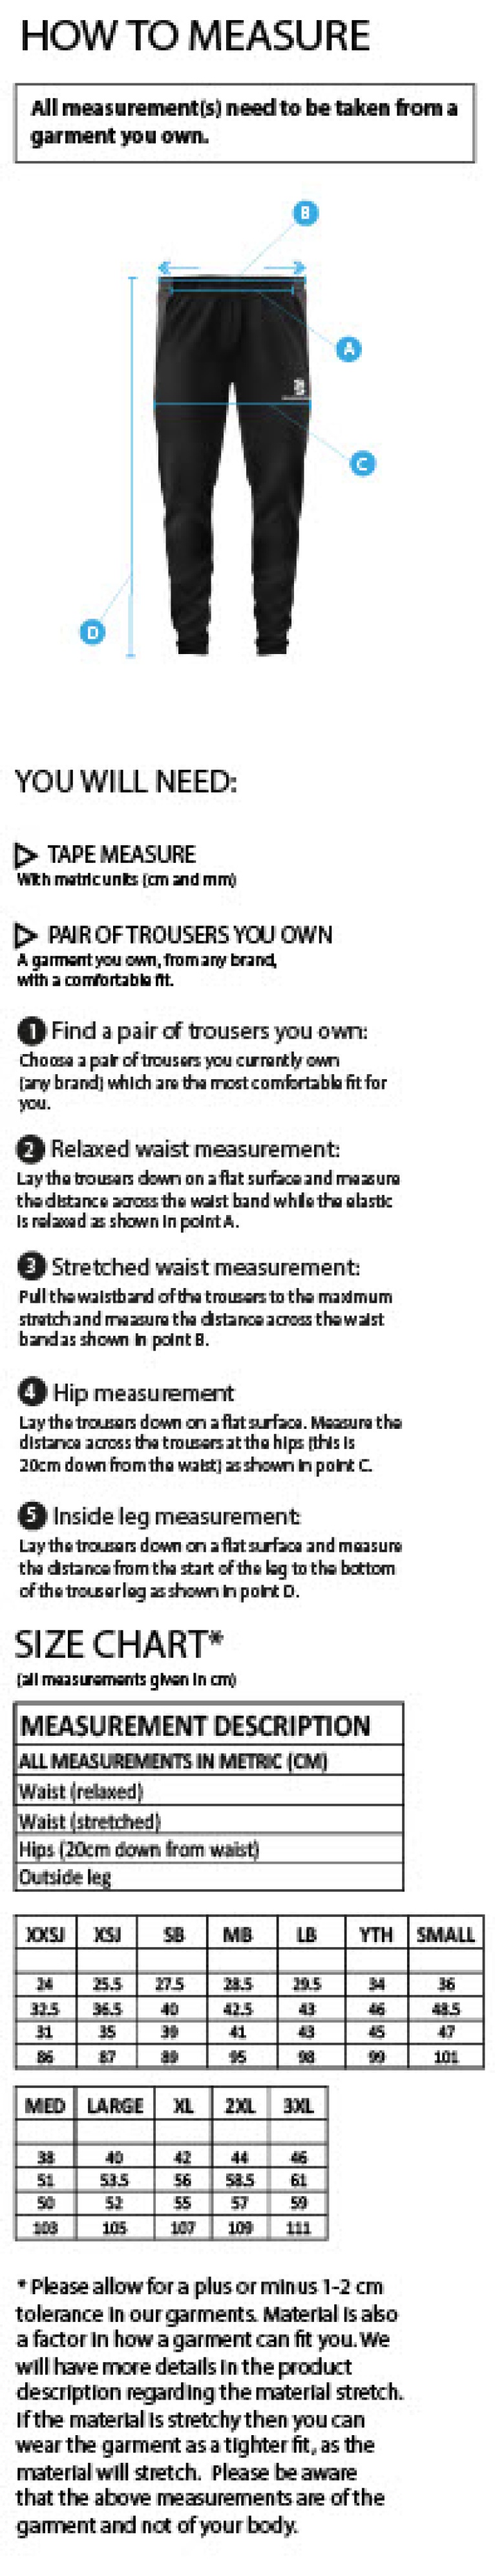 ROUNDERS ENGLAND - Dual TEK Pant - Size Guide